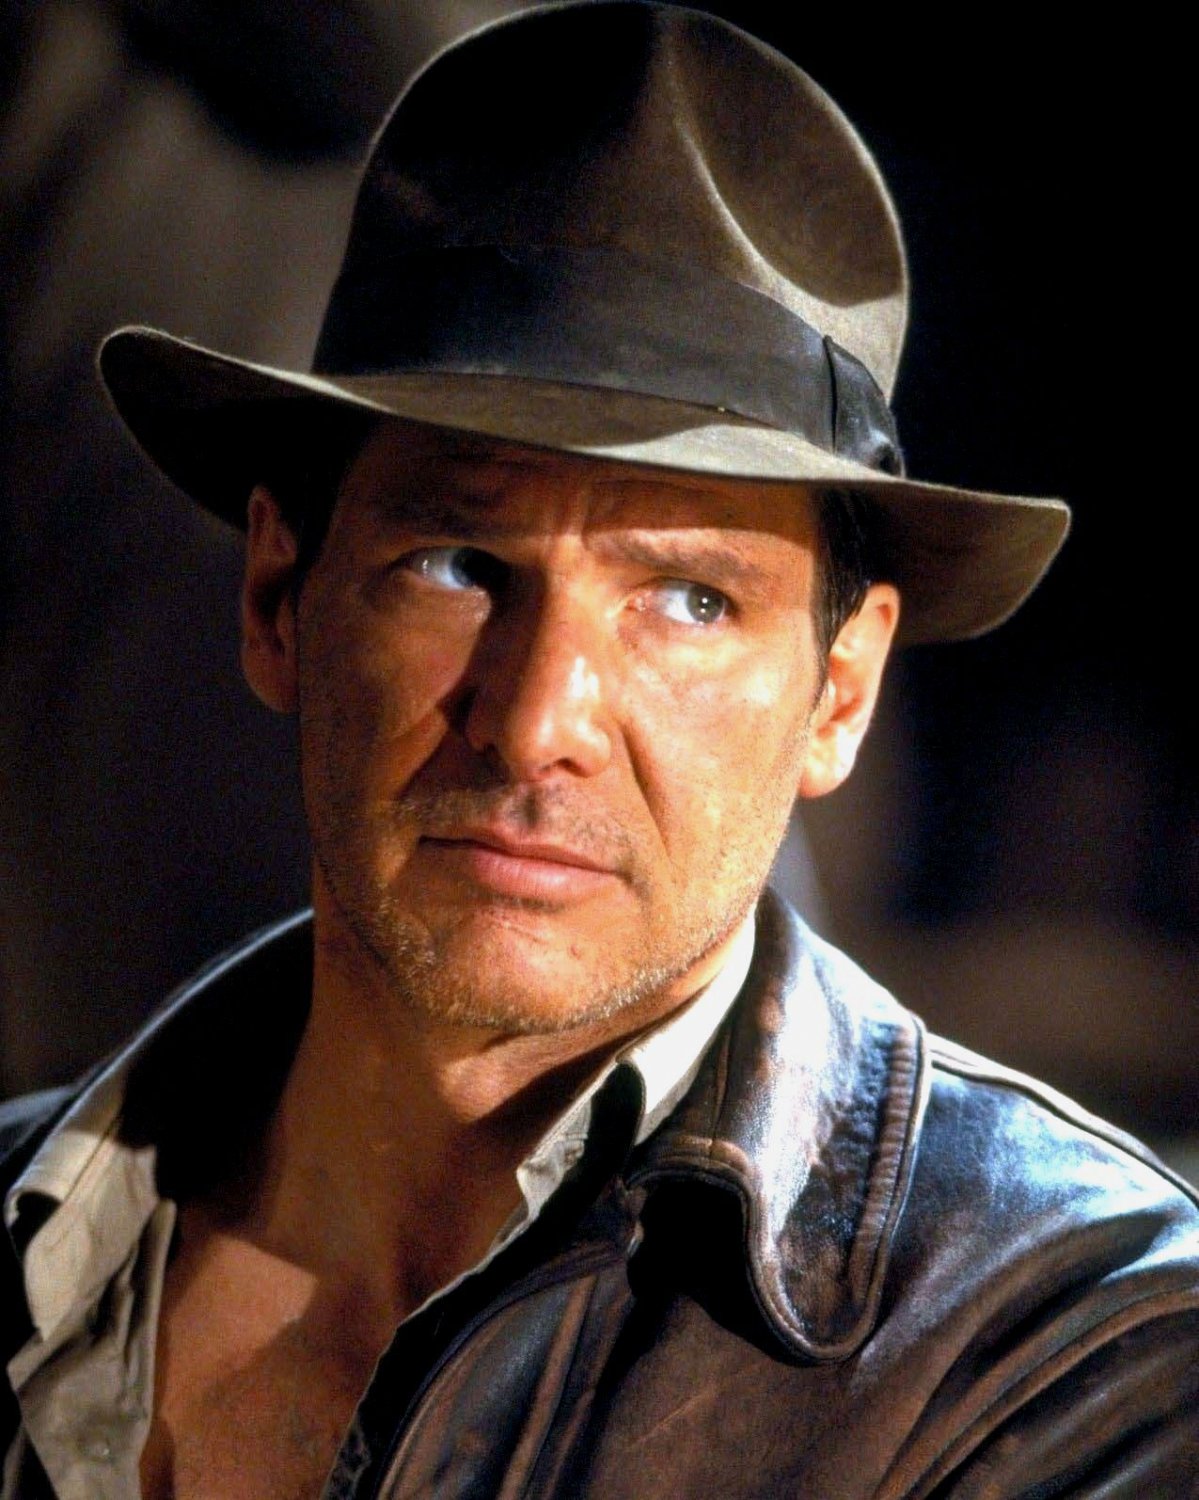 HARRISON FORD AS ICONIC CHARACTER "INDIANA JONES" 8X10 PUBLICITY PHOTO